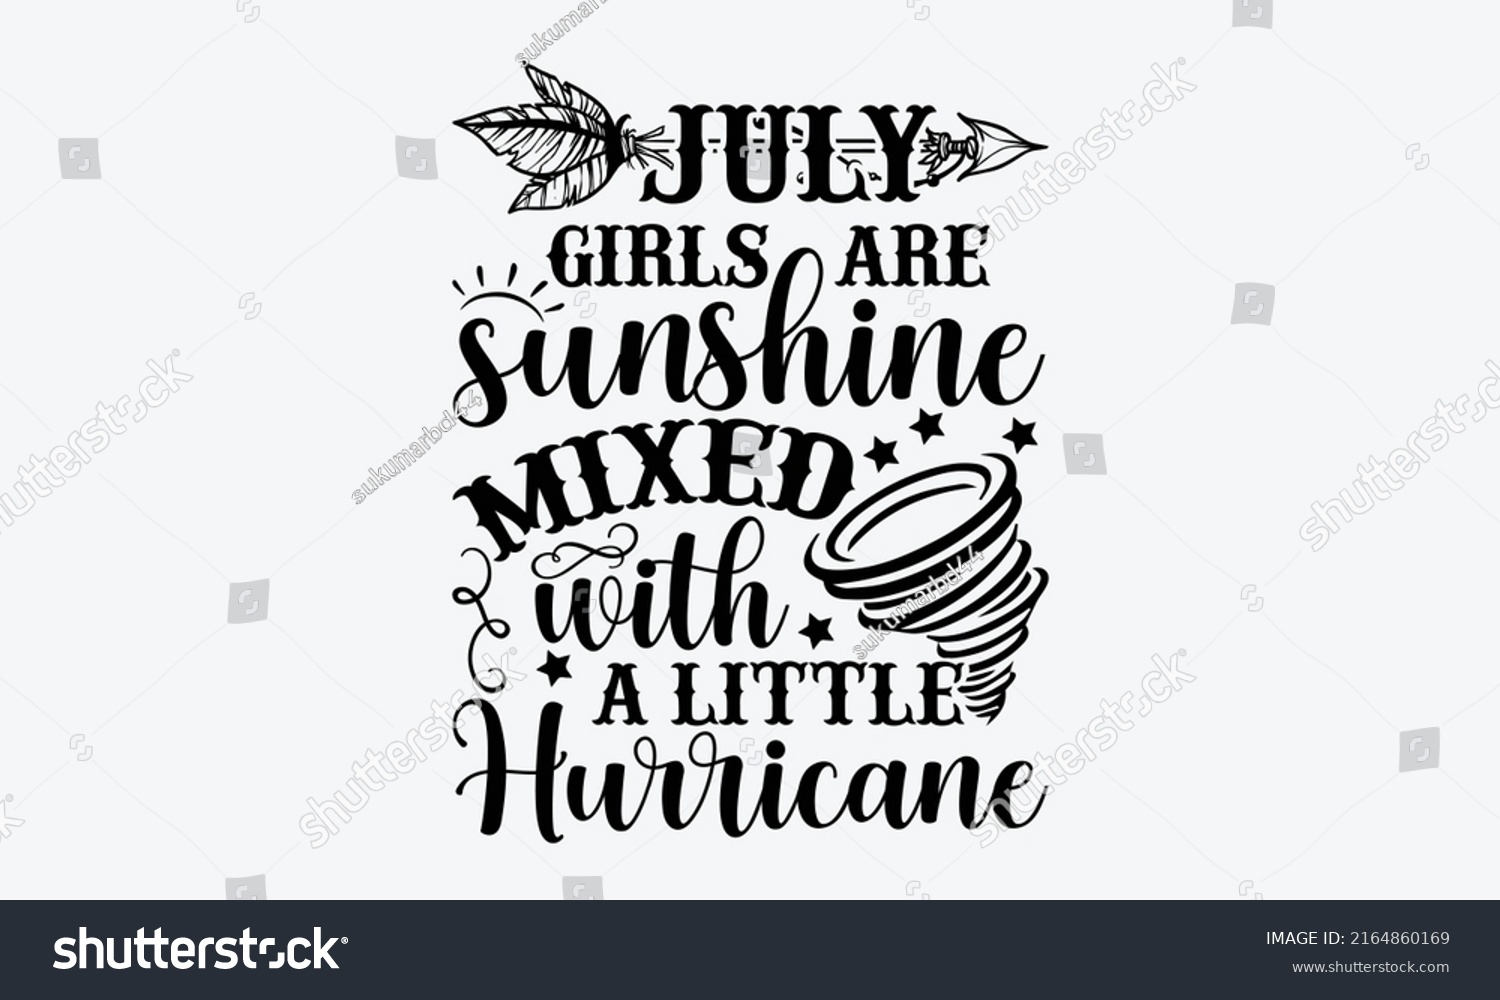 SVG of July girls are sunshine mixed with a little hurricane - Birthday Month t shirt design, Hand drawn lettering phrase, Calligraphy graphic design, SVG Files for Cutting Cricut and Silhouette svg